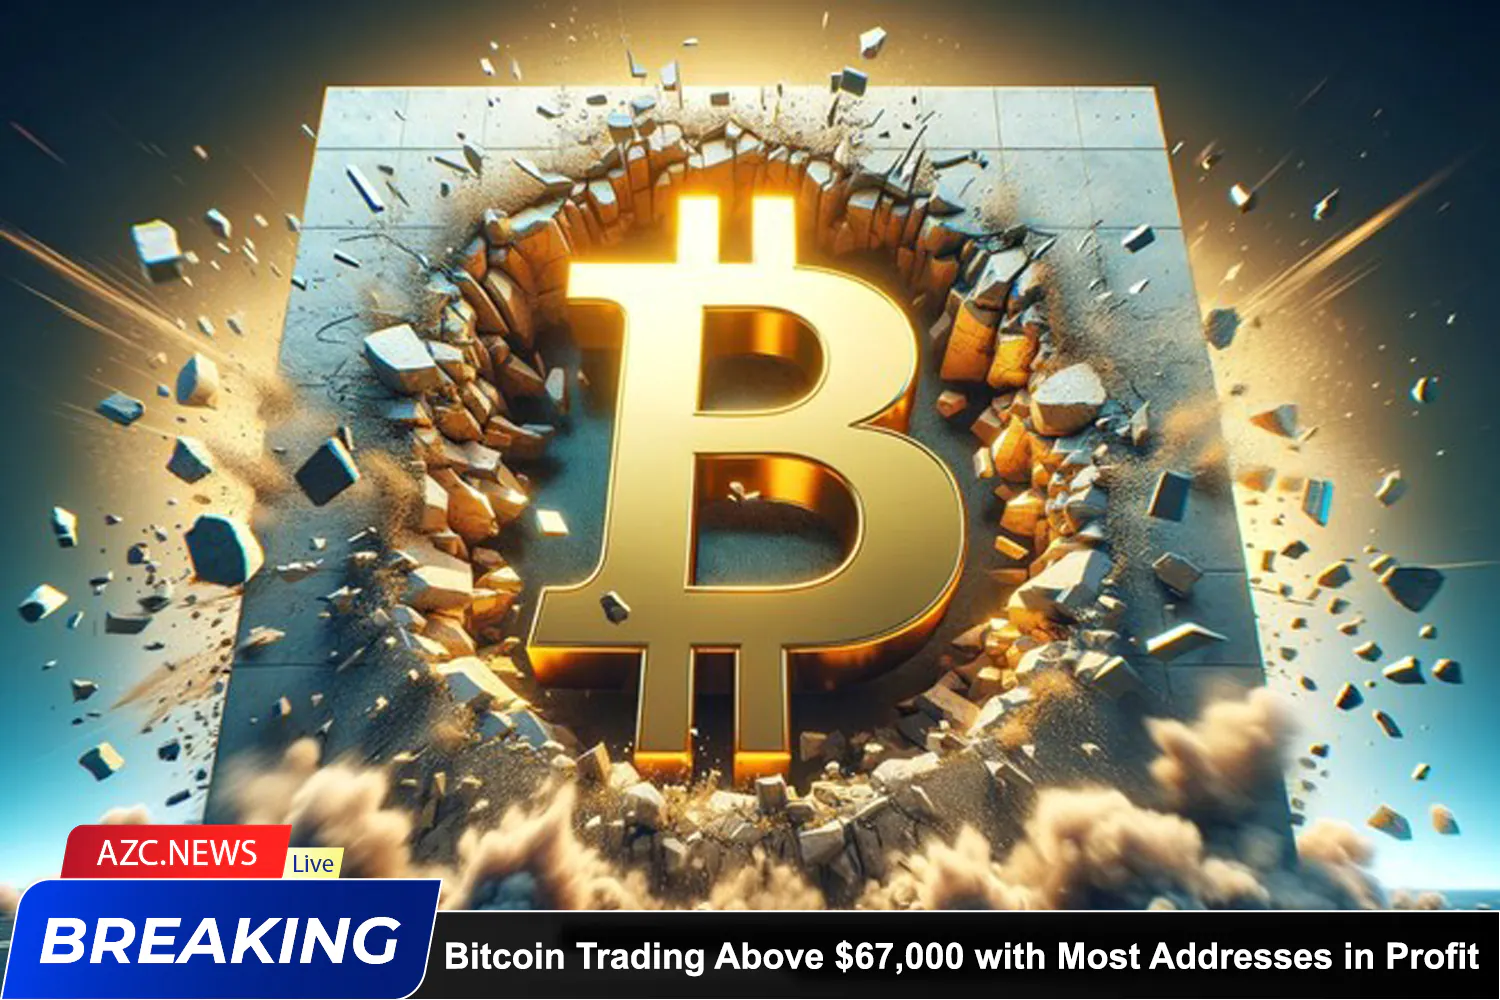 Azcnews Bitcoin Trading Above $67,000 With Most Addresses In Profit